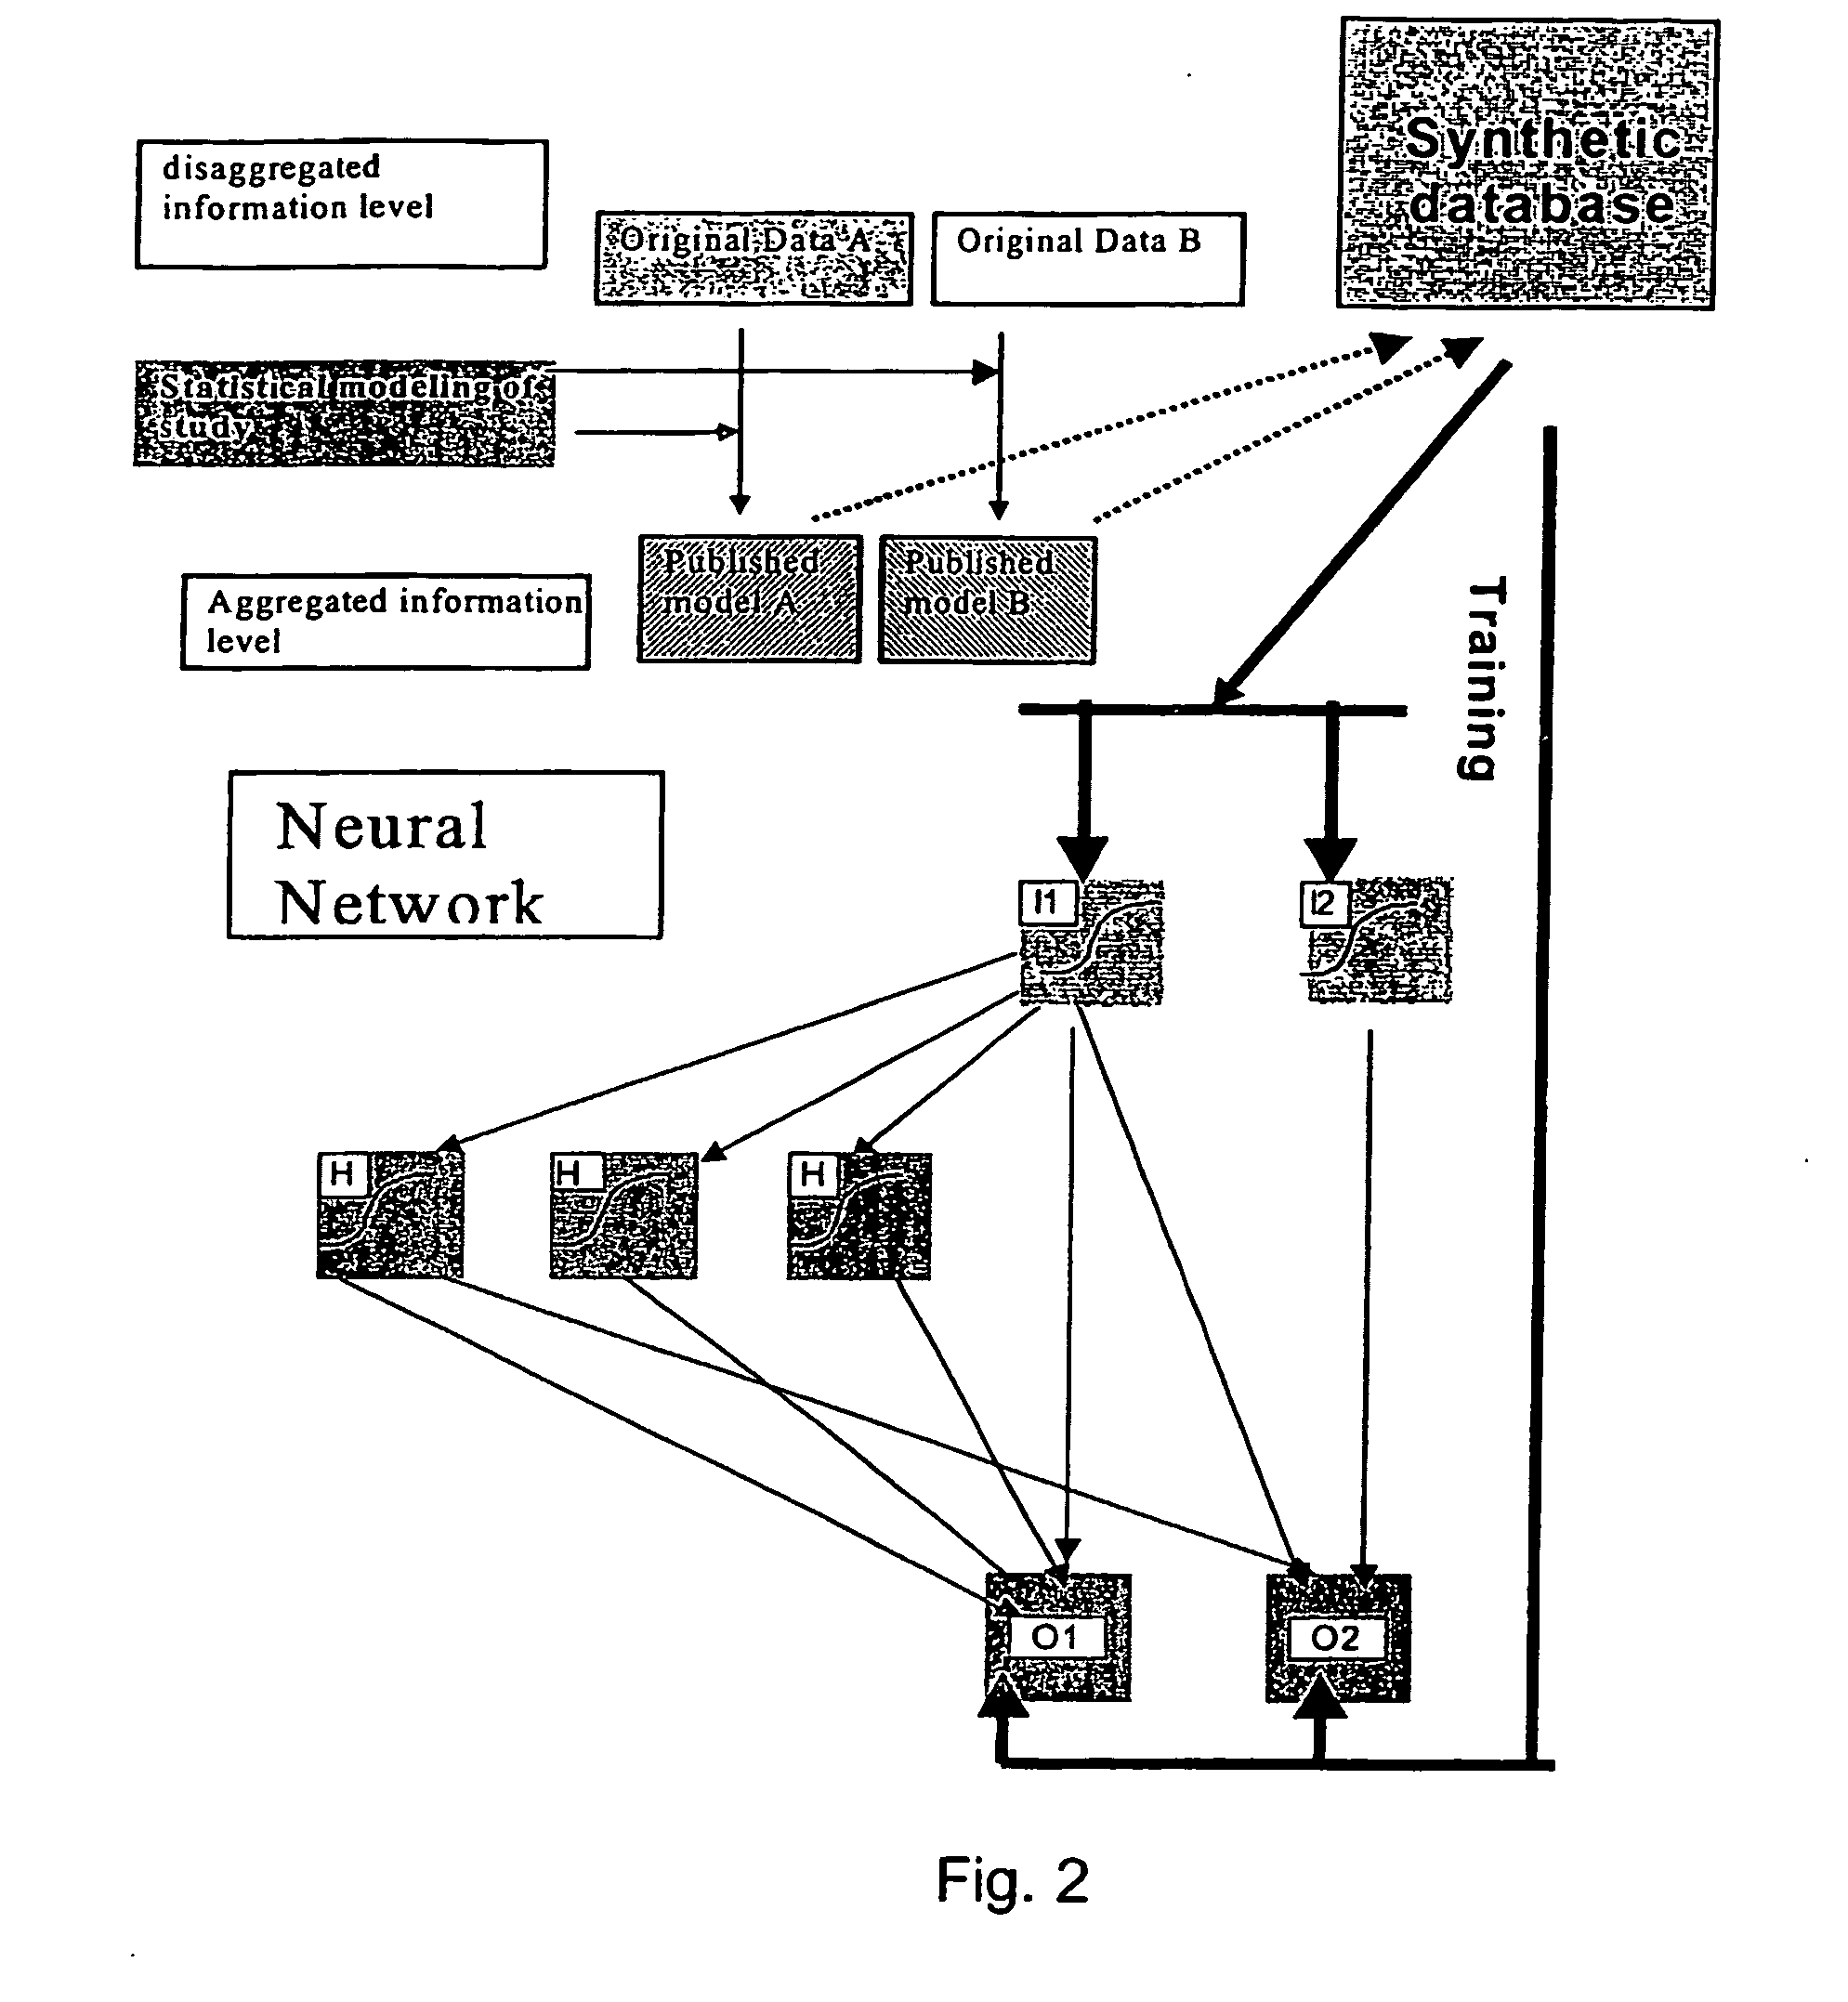 Method for training a learning-capable system